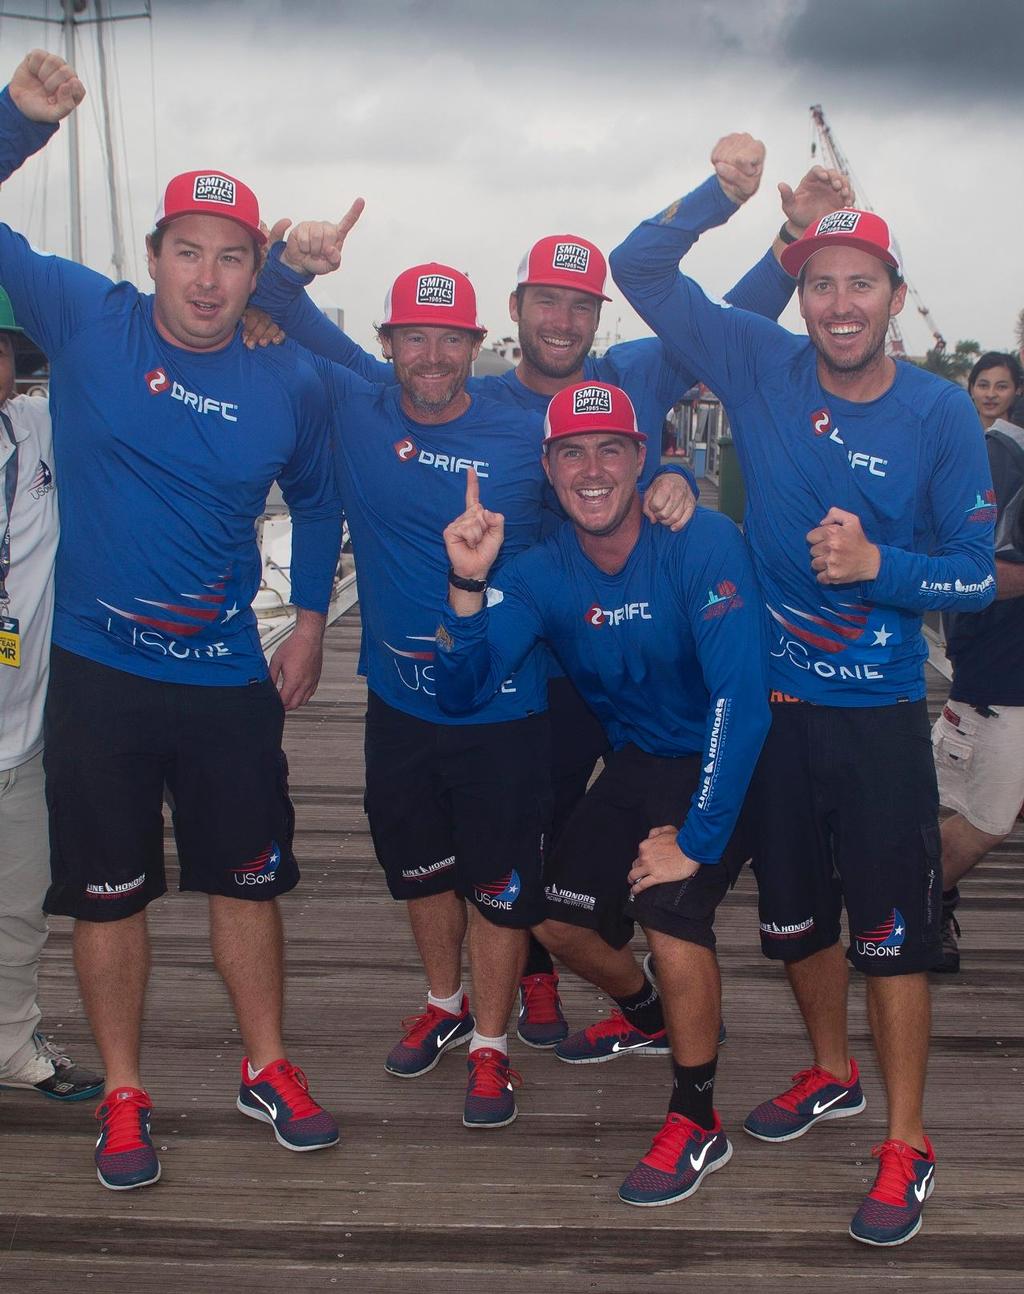 Taylor Canfeld and the crew of USone celebrate winning the Alpari World Match Racing Tour. 

The Alpari World Match Racing Tour (AWMRT) is the leading professional sailing series featuring six World Championship events across the globe, sanctioned by the International Sailing Federation (ISAF).

This image is free for editorial use and must be credited: AMWRT/onEdition, for further free images please go to http://www.w-w-i.com/wmrt_2013/

For all media enquiries please contact: Vicky Pounds vick photo copyright  OnEdition / WMRT http://wmrt.com/ taken at  and featuring the  class